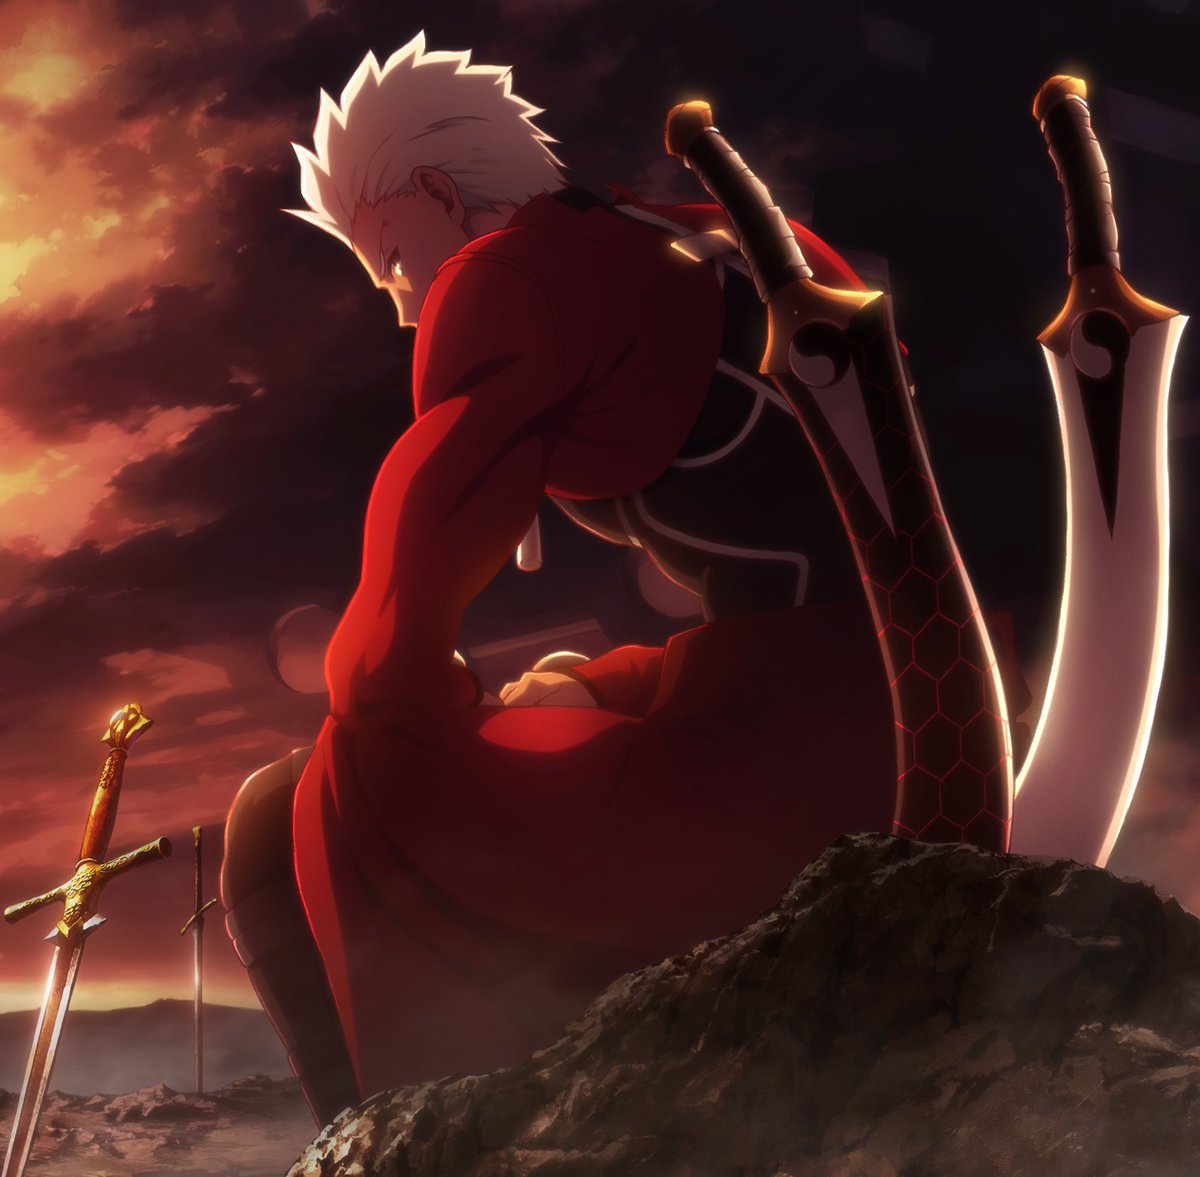 But I believe that that is only a surface level reading of his character, and that there is plenty of evidence across all 3 routes of Fate/Stay Night that his true motivation, perhaps one that he is not even consciously aware of himself, goes deeper than that.